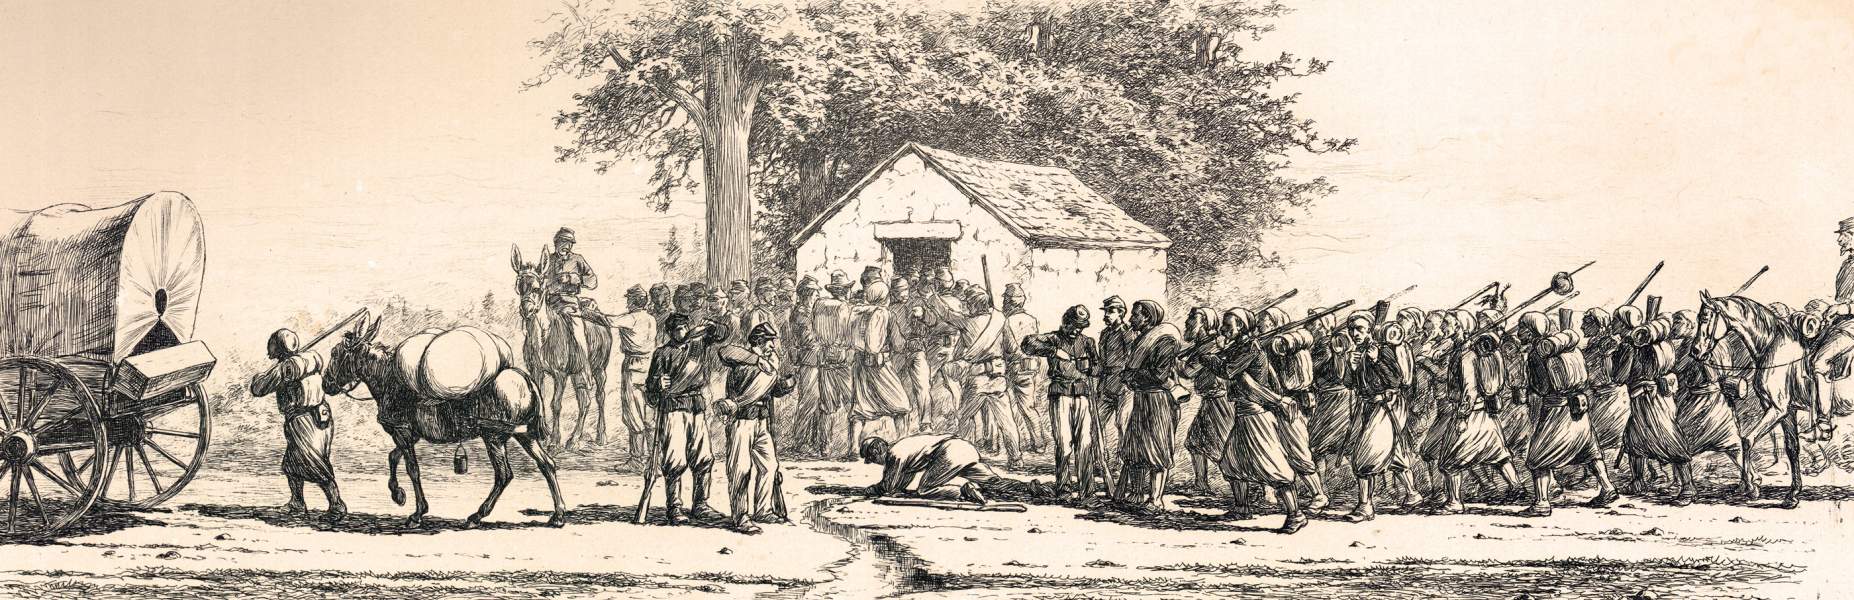 "A Thirsty Crowd at the Old Spring House," Edwin Forbes, copper plate etching, 1876, zoomable image